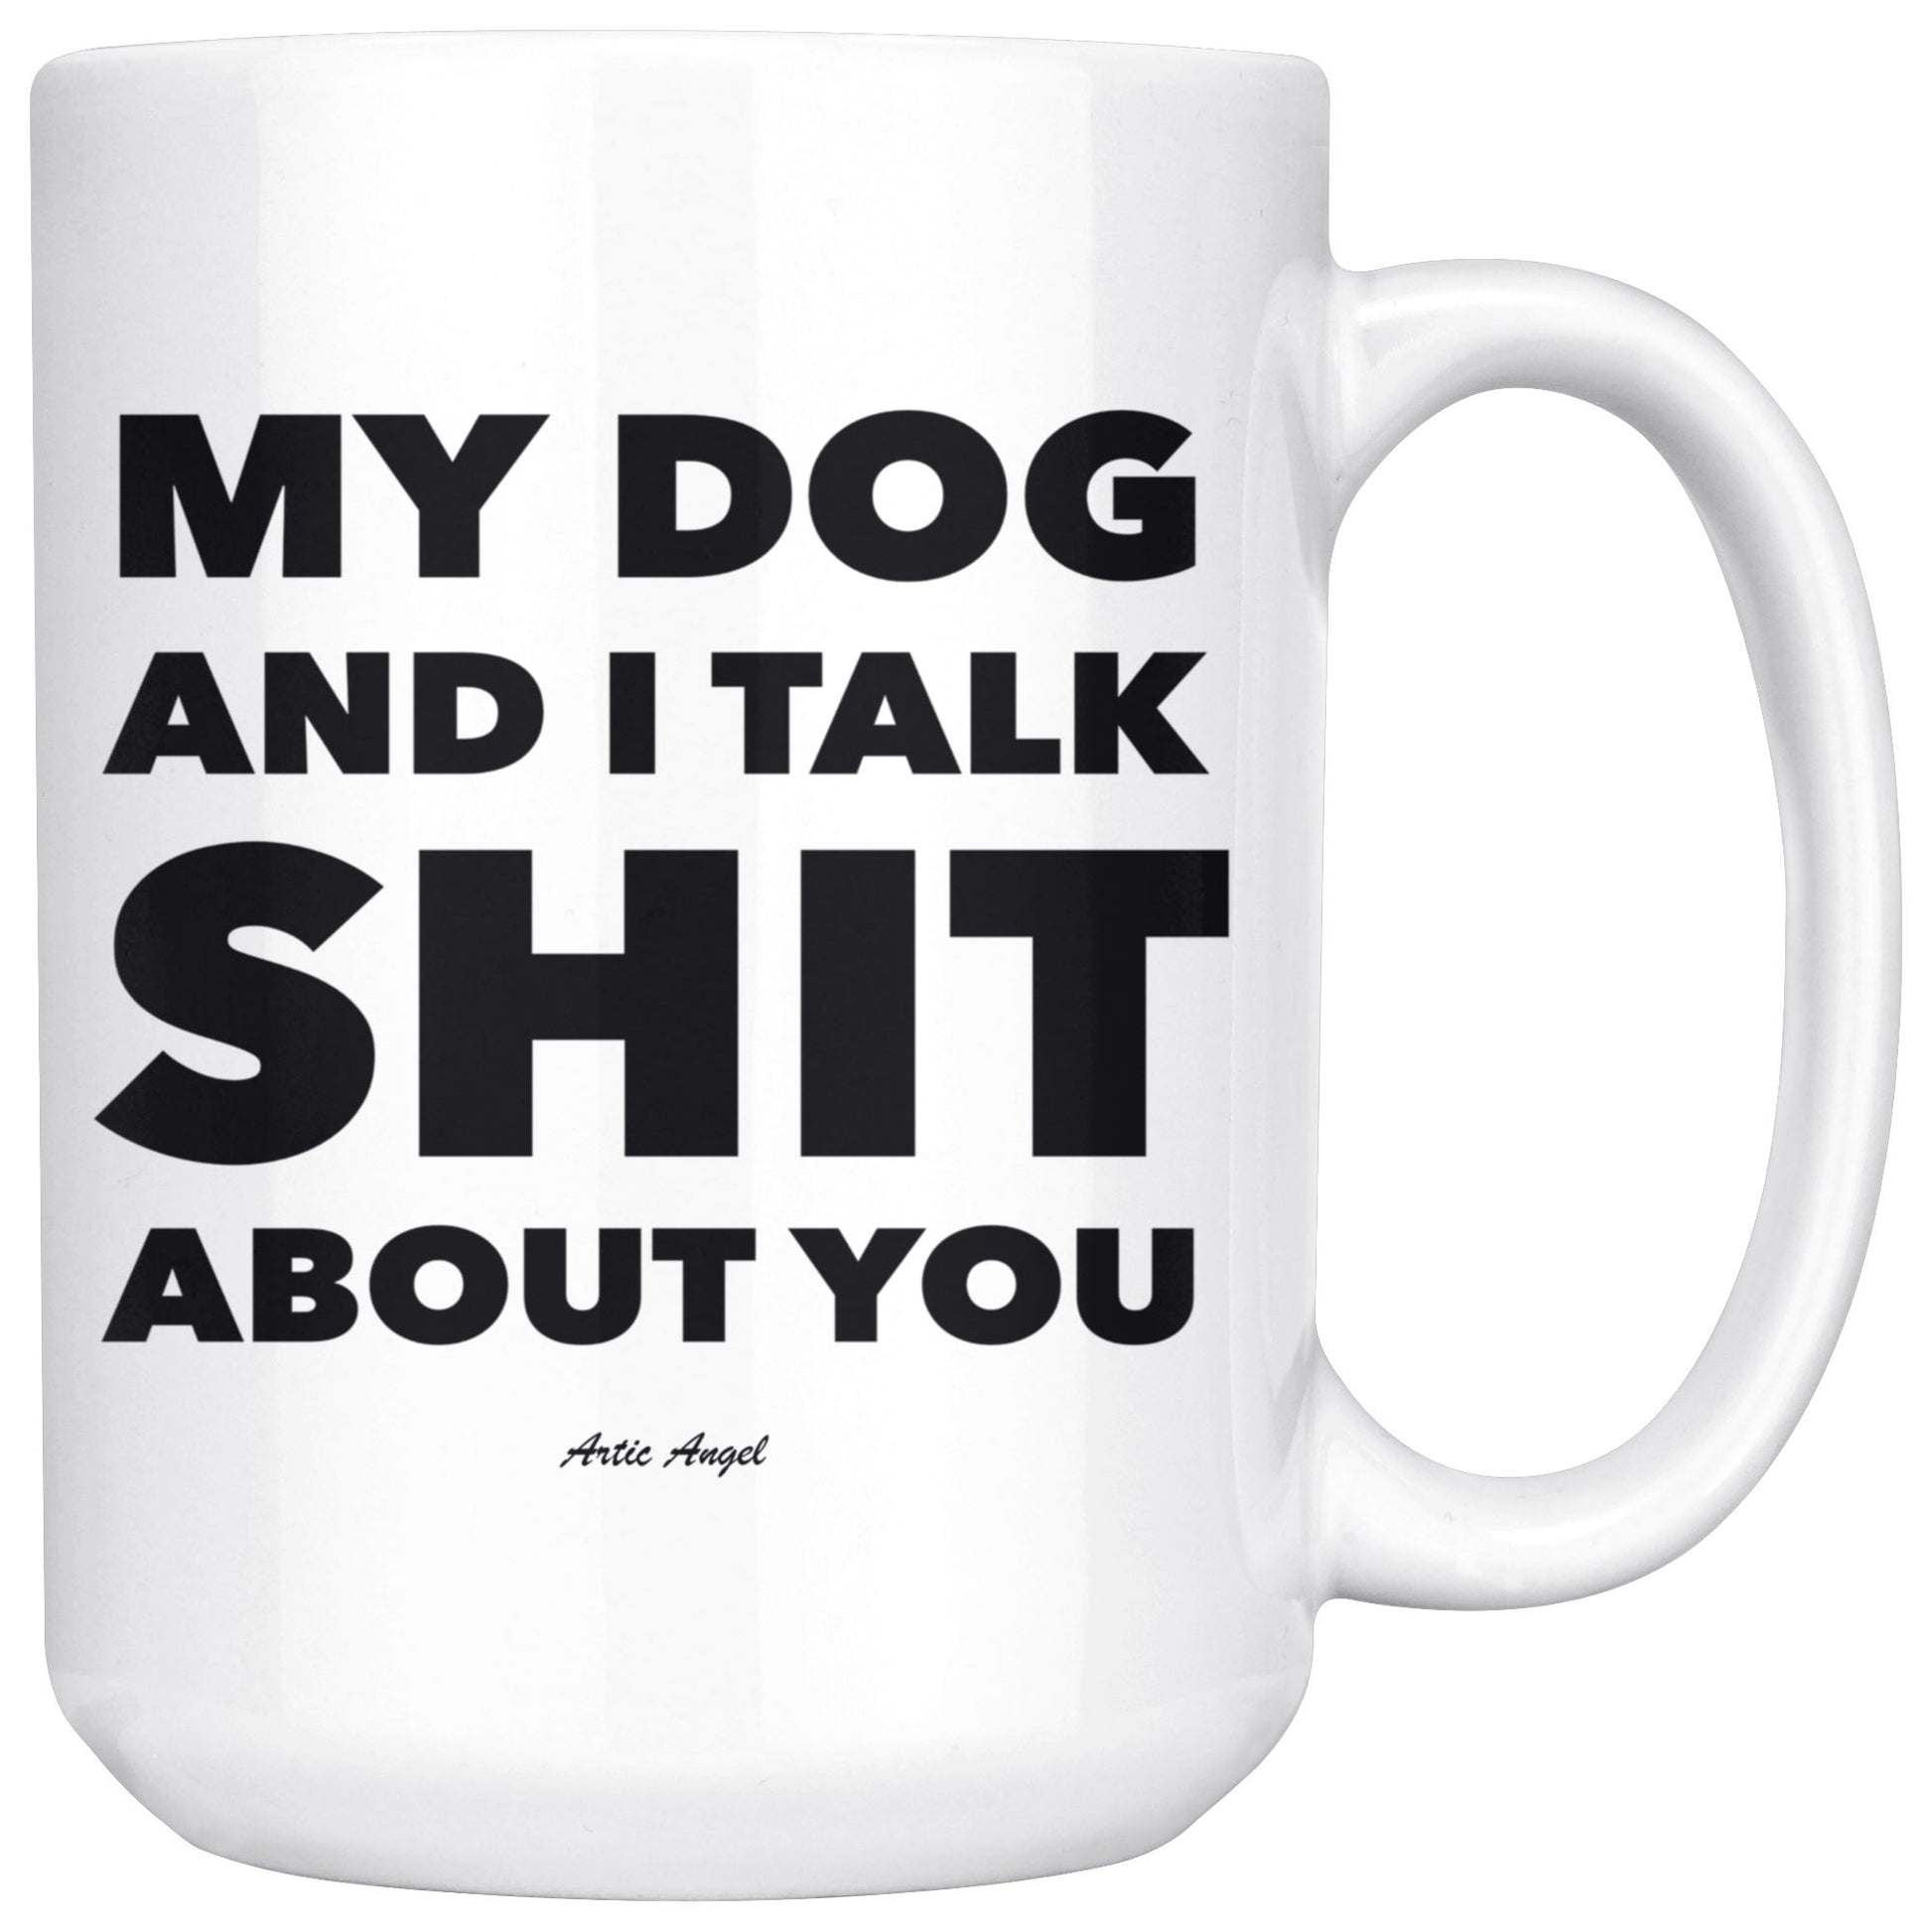 Funny "My Dog And I Talk Shit About You" - Coffee Mug Drinkware White - 15oz 